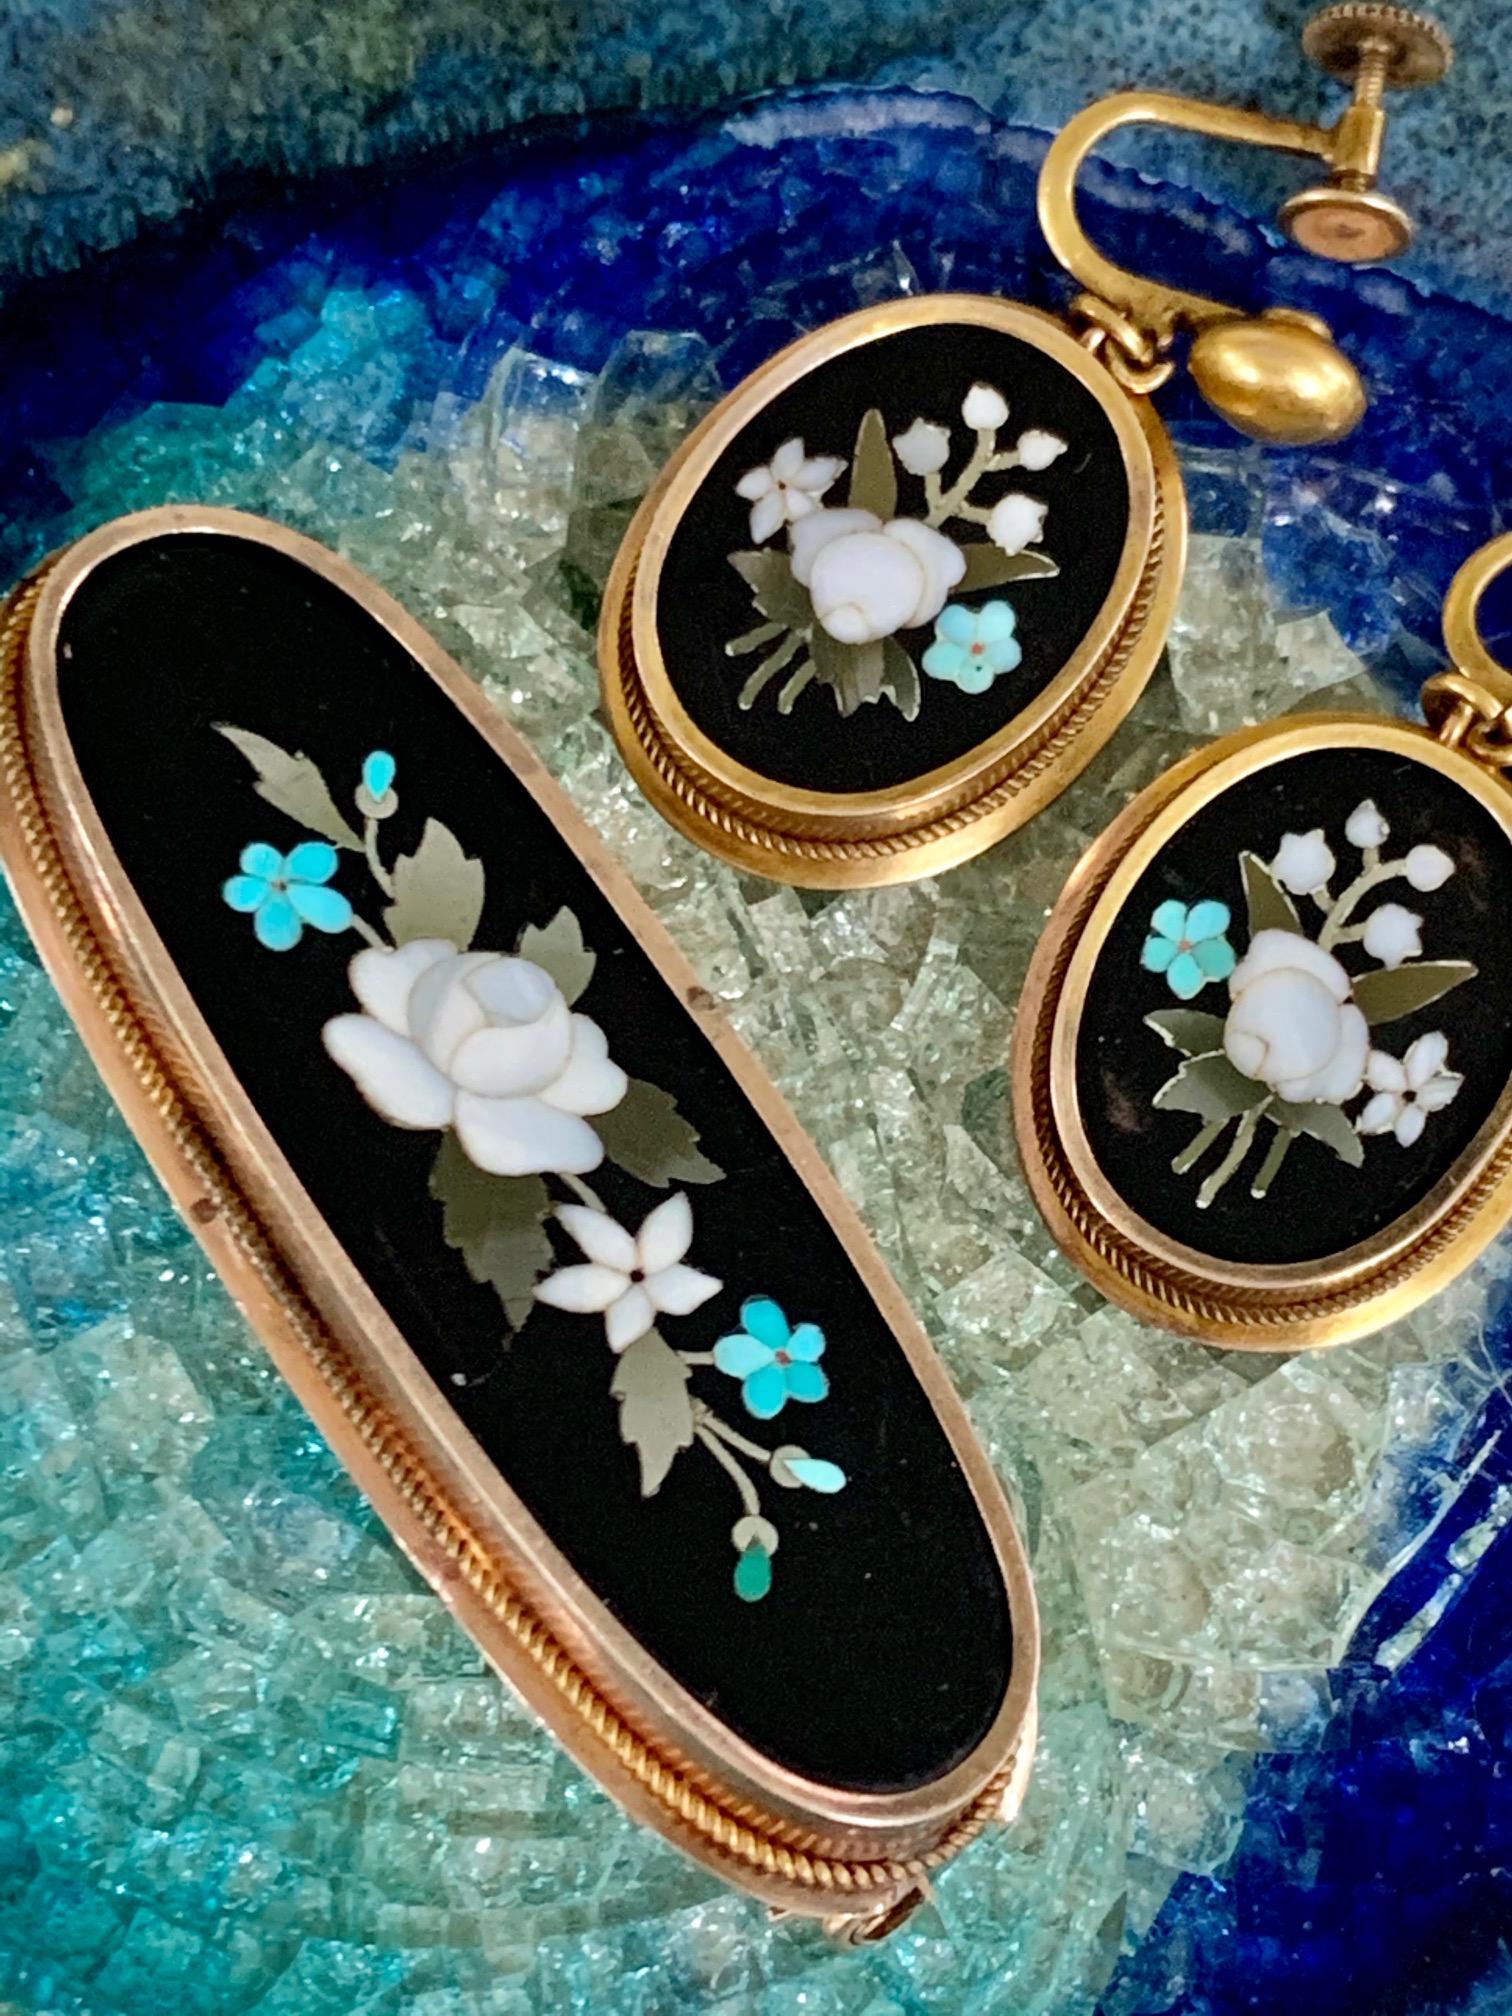 Pietra Dura pieces are absolutely lovely and this set is no different.  This matching brooch and screw back earring set feature floral scenes in white, green, blue on a black background.  

The earrings could easily be converted from screw back to